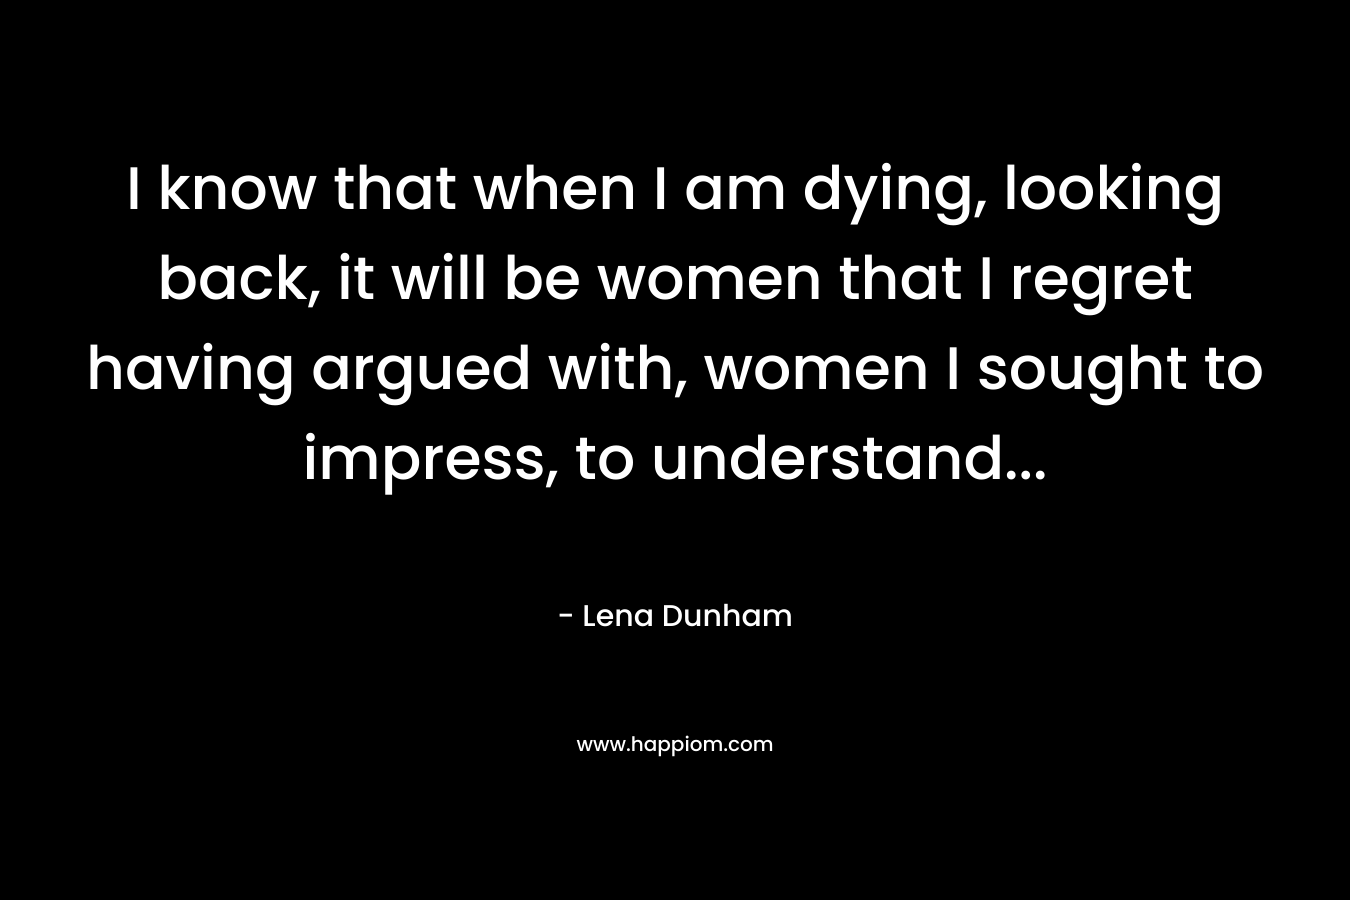 I know that when I am dying, looking back, it will be women that I regret having argued with, women I sought to impress, to understand...